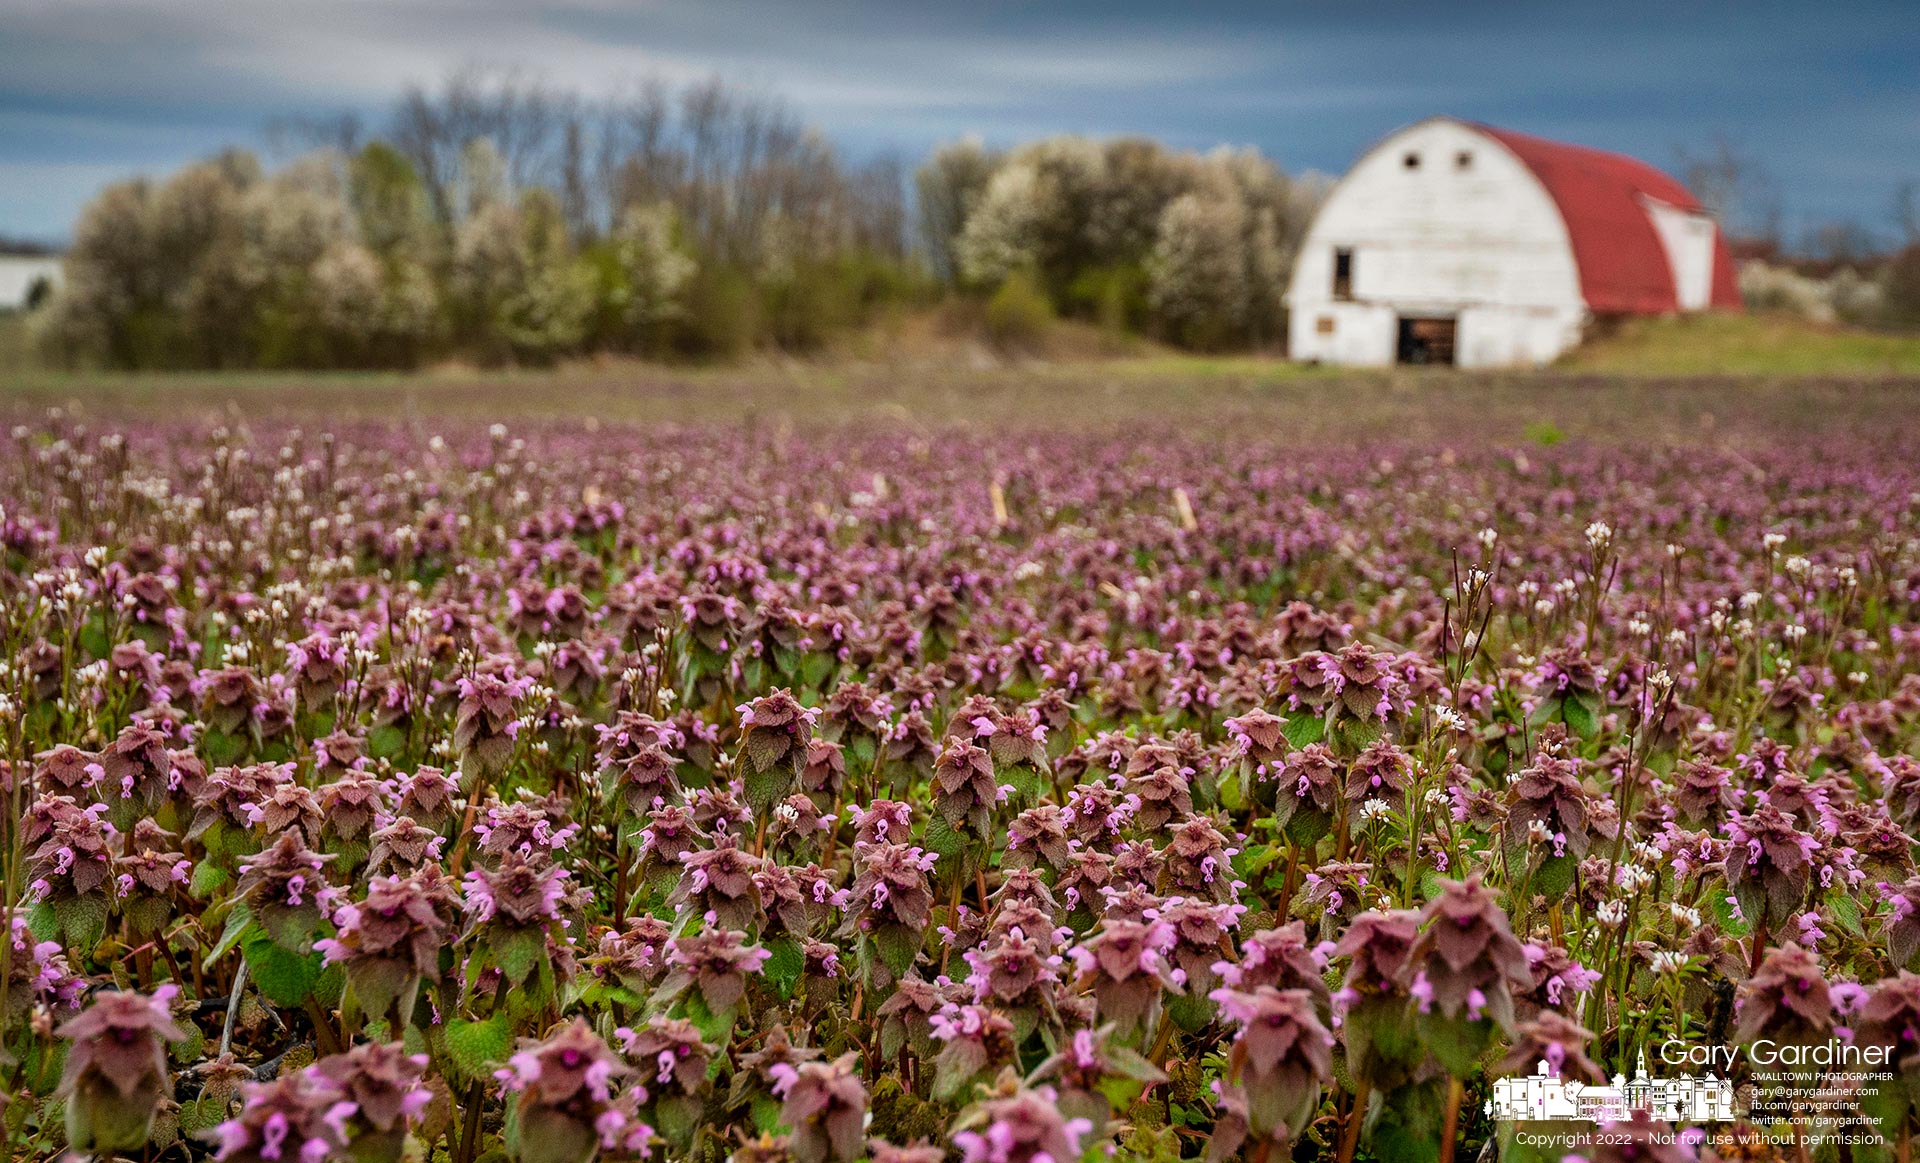 The purple leaves and flowers of purple deadnettle begin to blanket sections of the upper fields at the Braun Farm. My Final Photo for April 11, 2022.